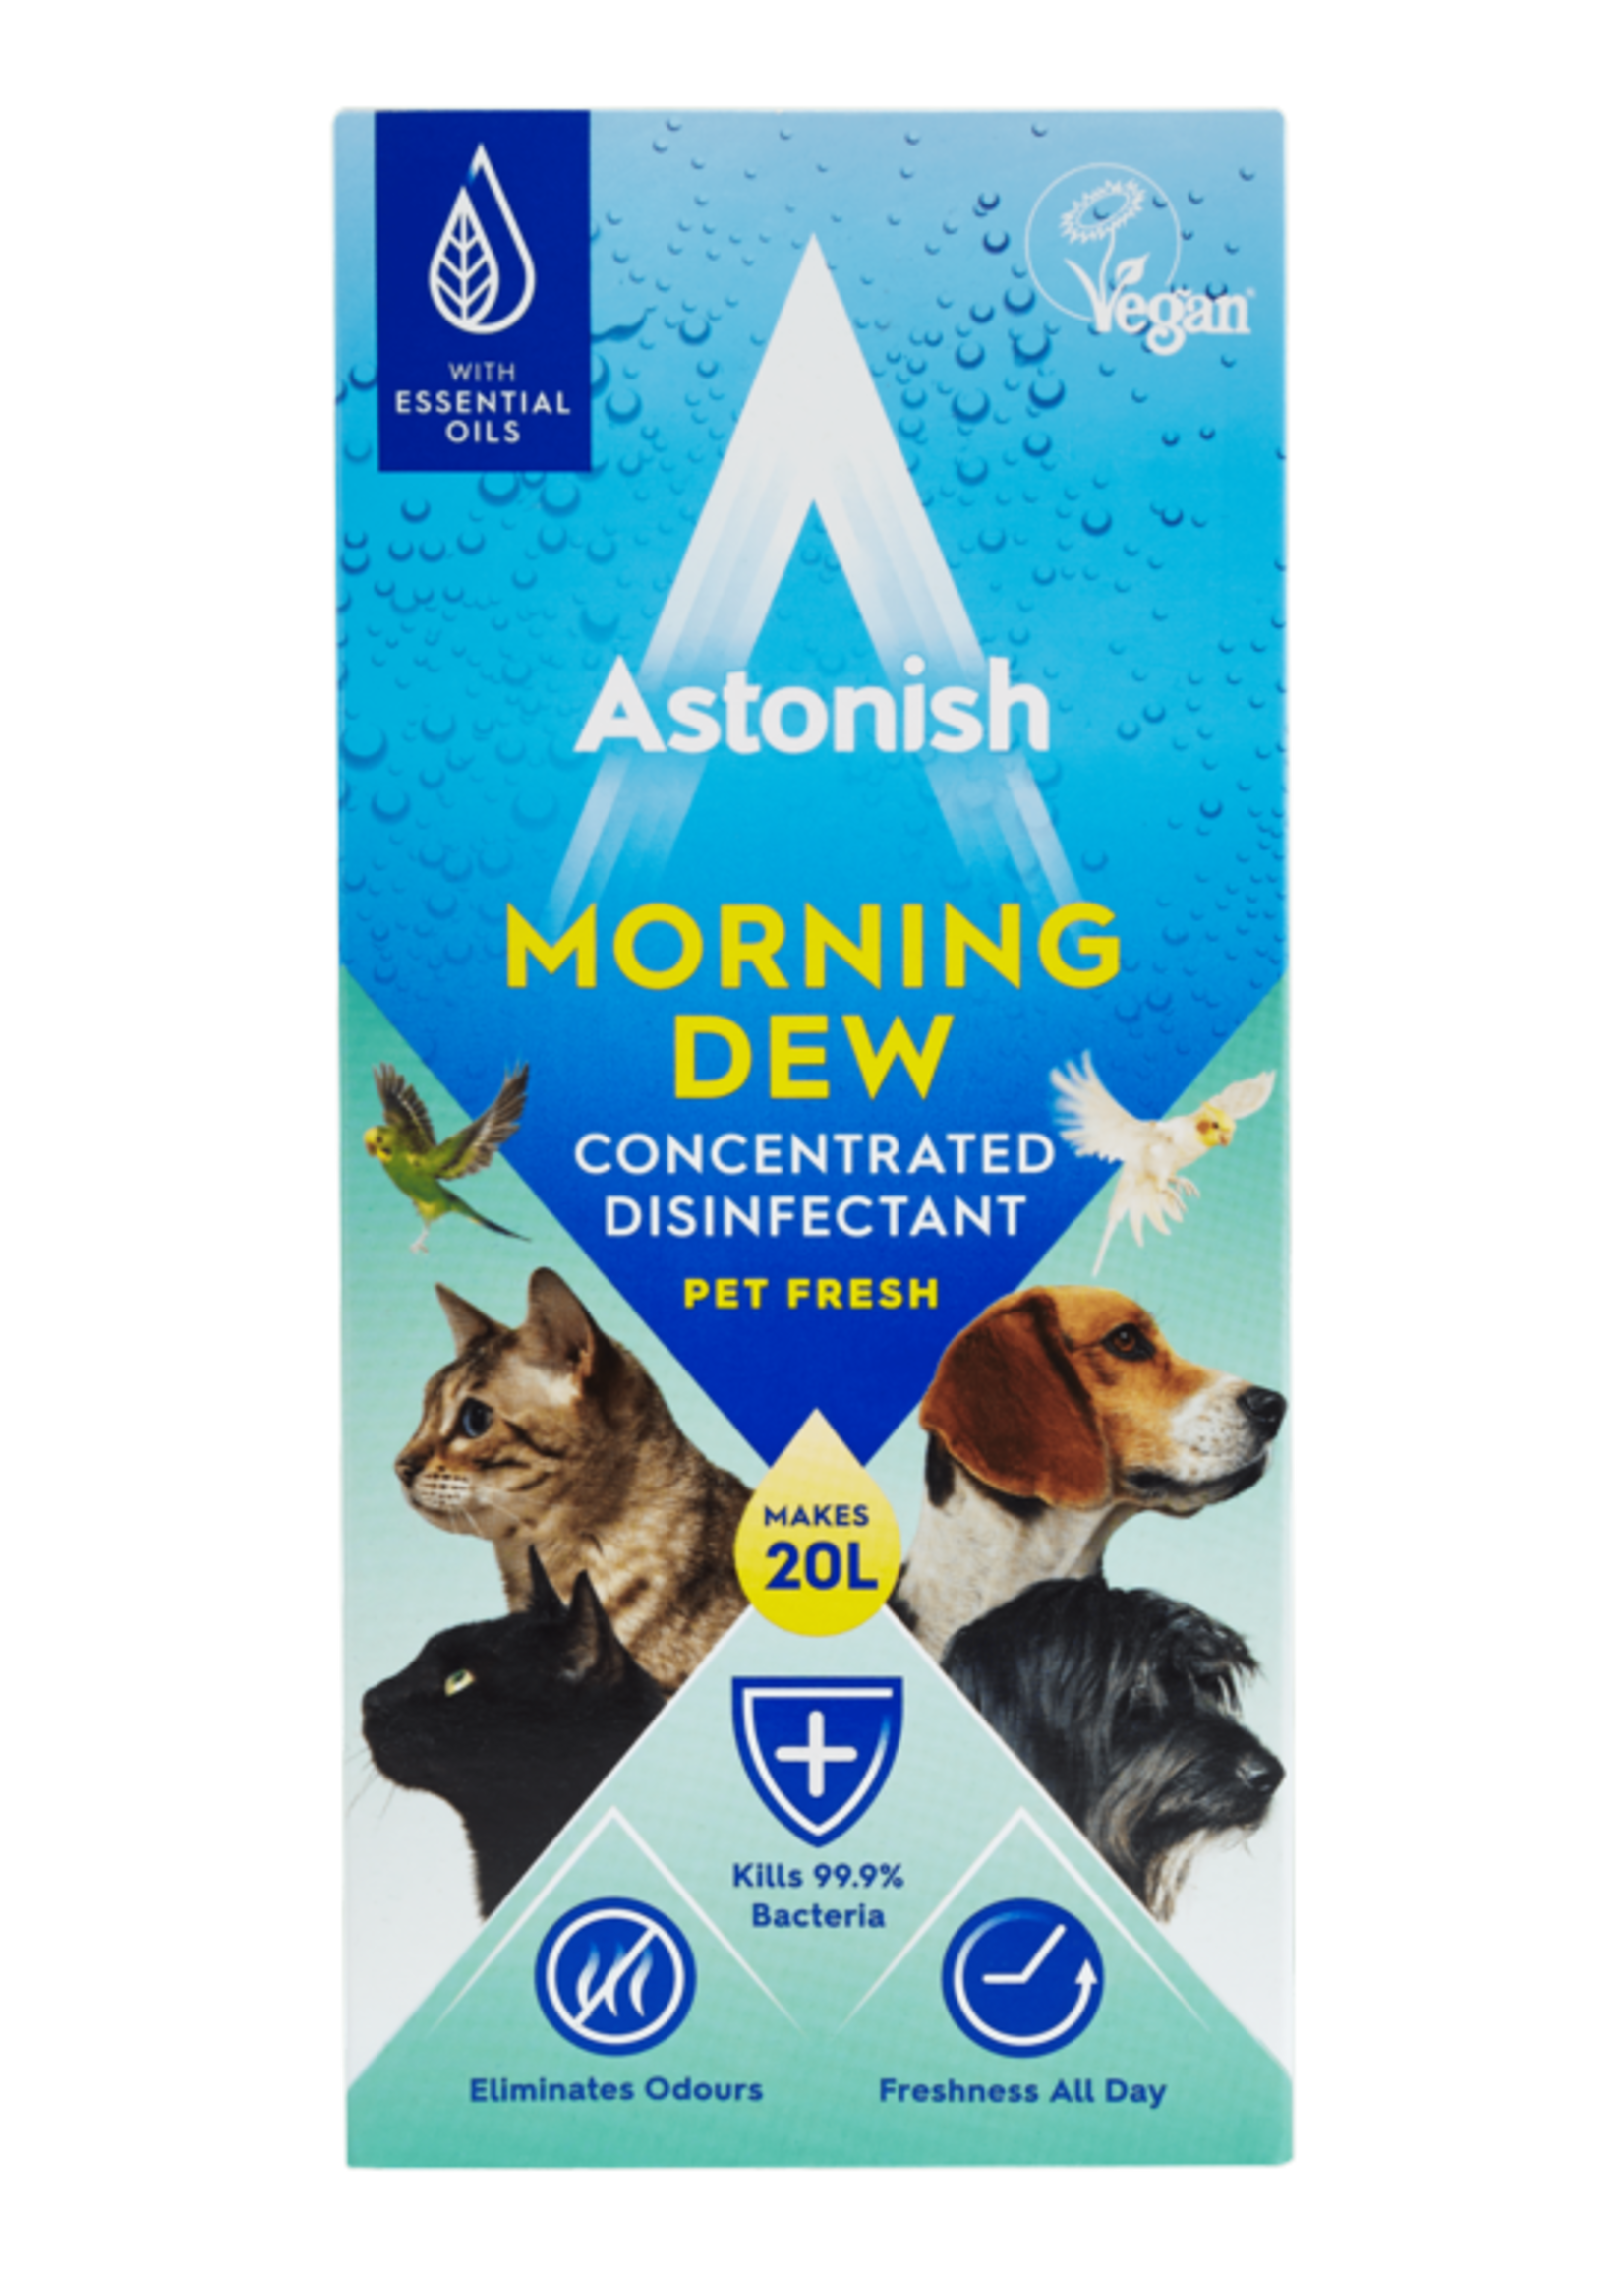 Astonish Astonish Morning Dew Pet Multi Use Concentrated Disinfectant 500ml